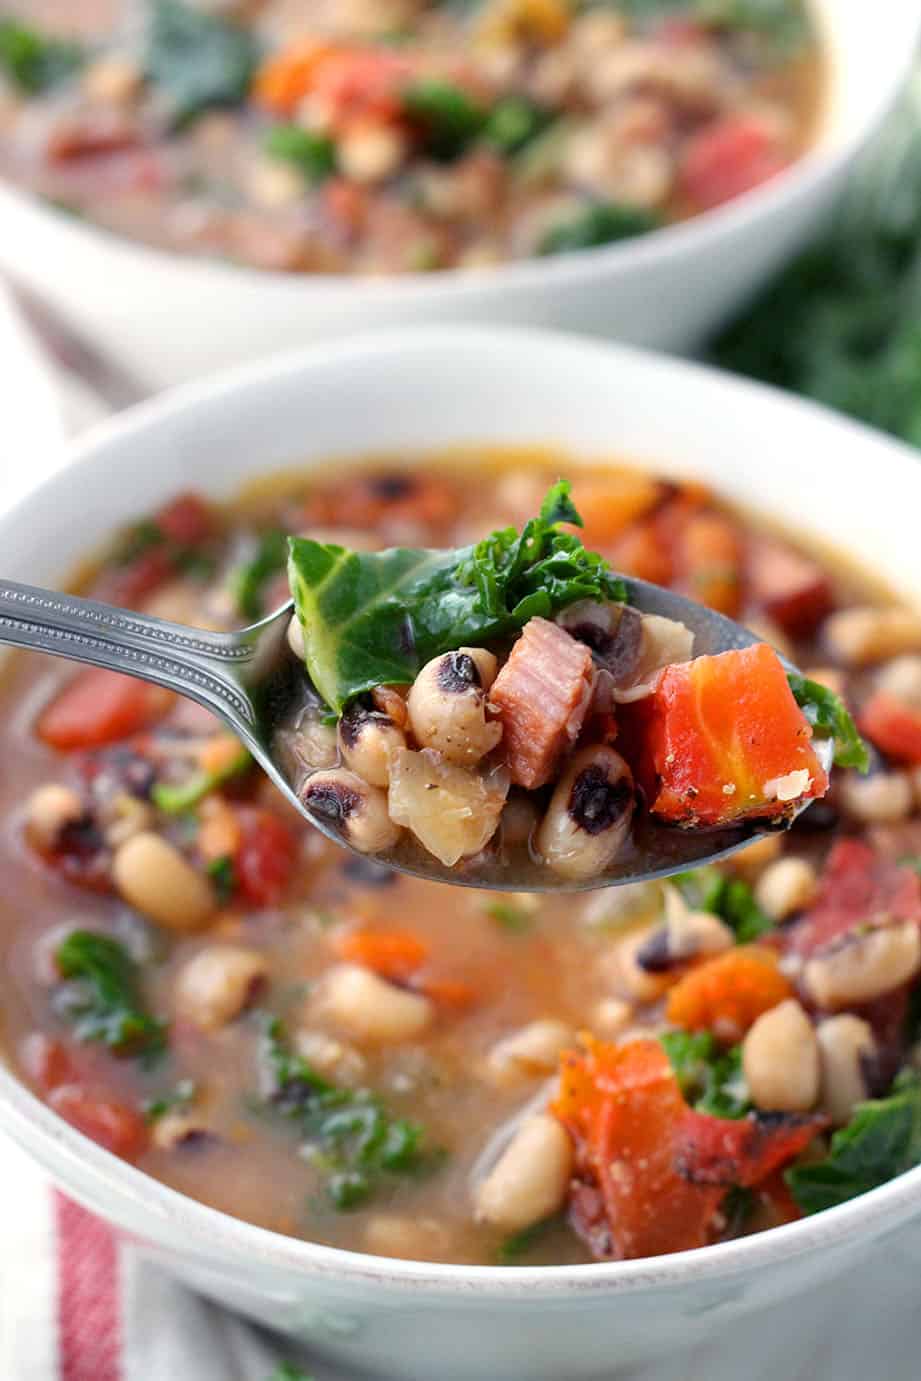 This Instant Pot Black Eyed Pea Soup is an easy and fast way to serve traditional black eyed peas and greens on New Year's day for good luck and good health! Packed with veggies, healthy pulses, freezable, and gluten/dairy free. #blackeyedpeas #glutenfreesoup #instantpot #pressurecooker #freezermeals #newyearsrecipes